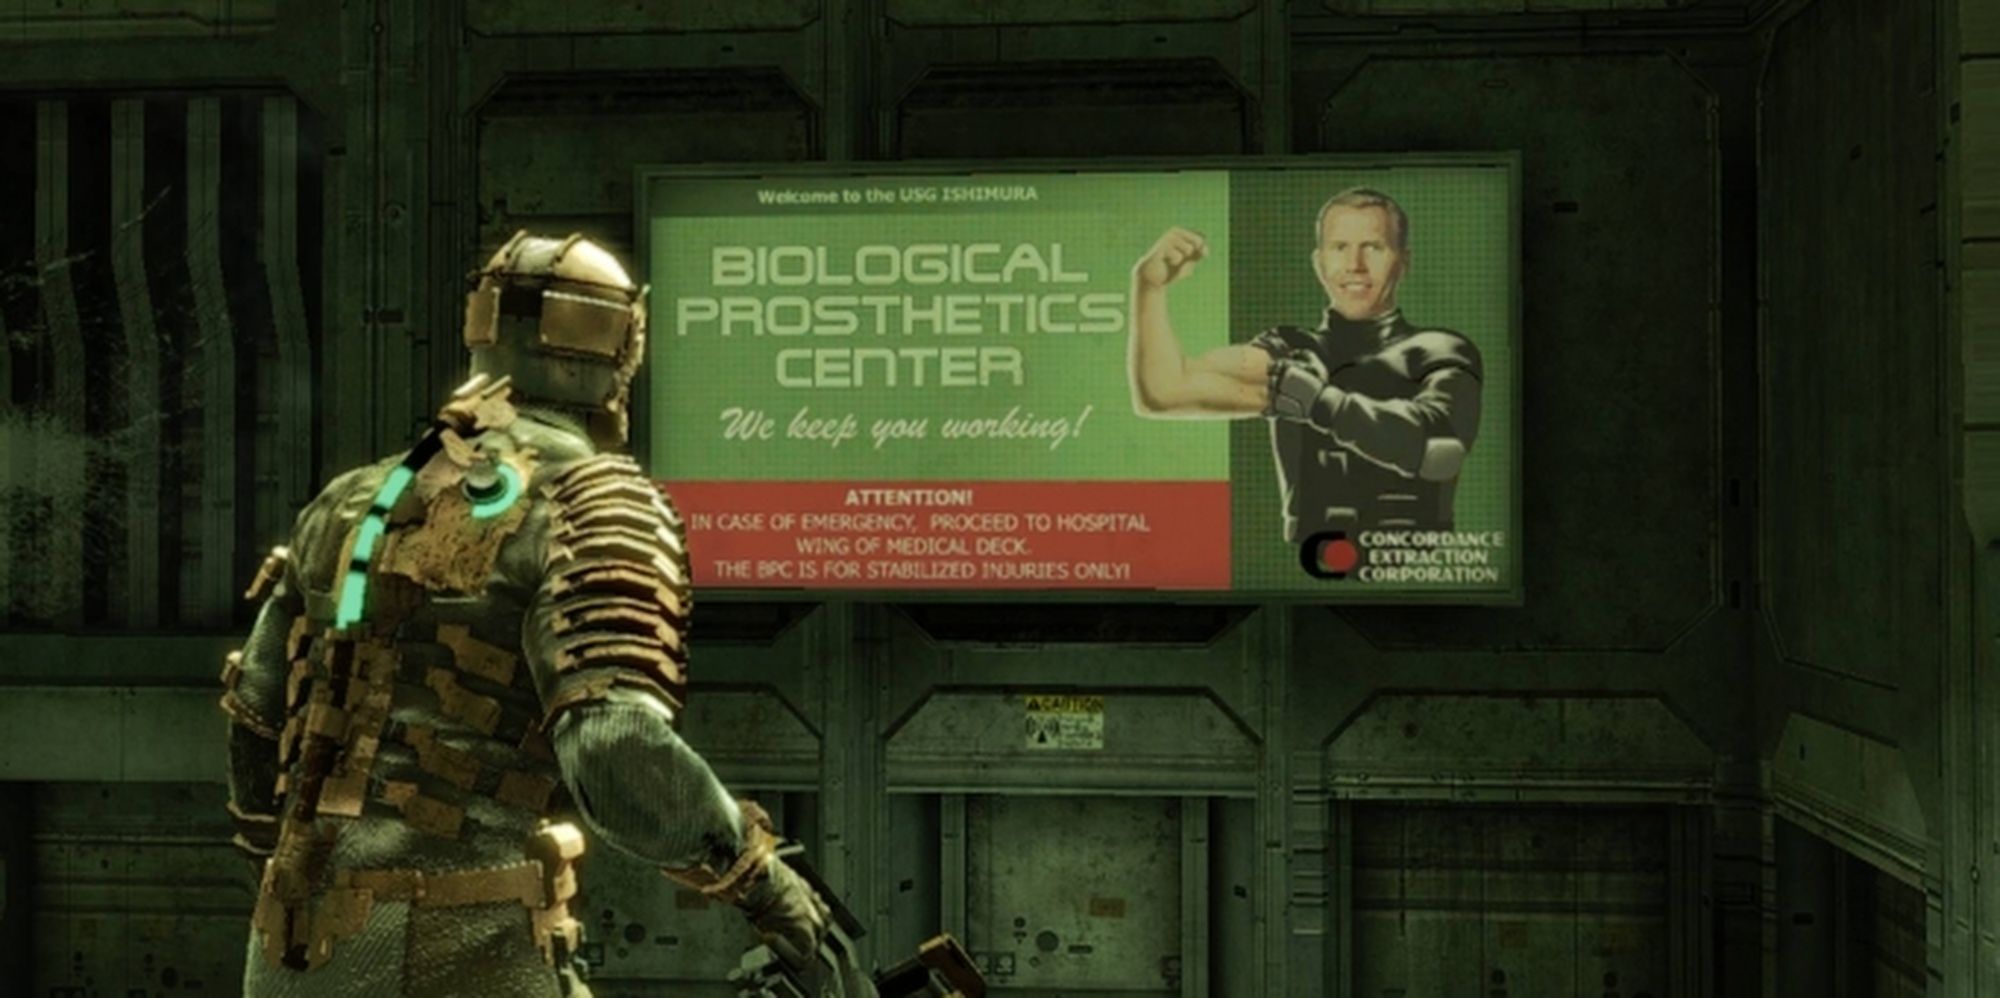 Dead Space: Advert Sign For The Ishimura Prosthetic Center